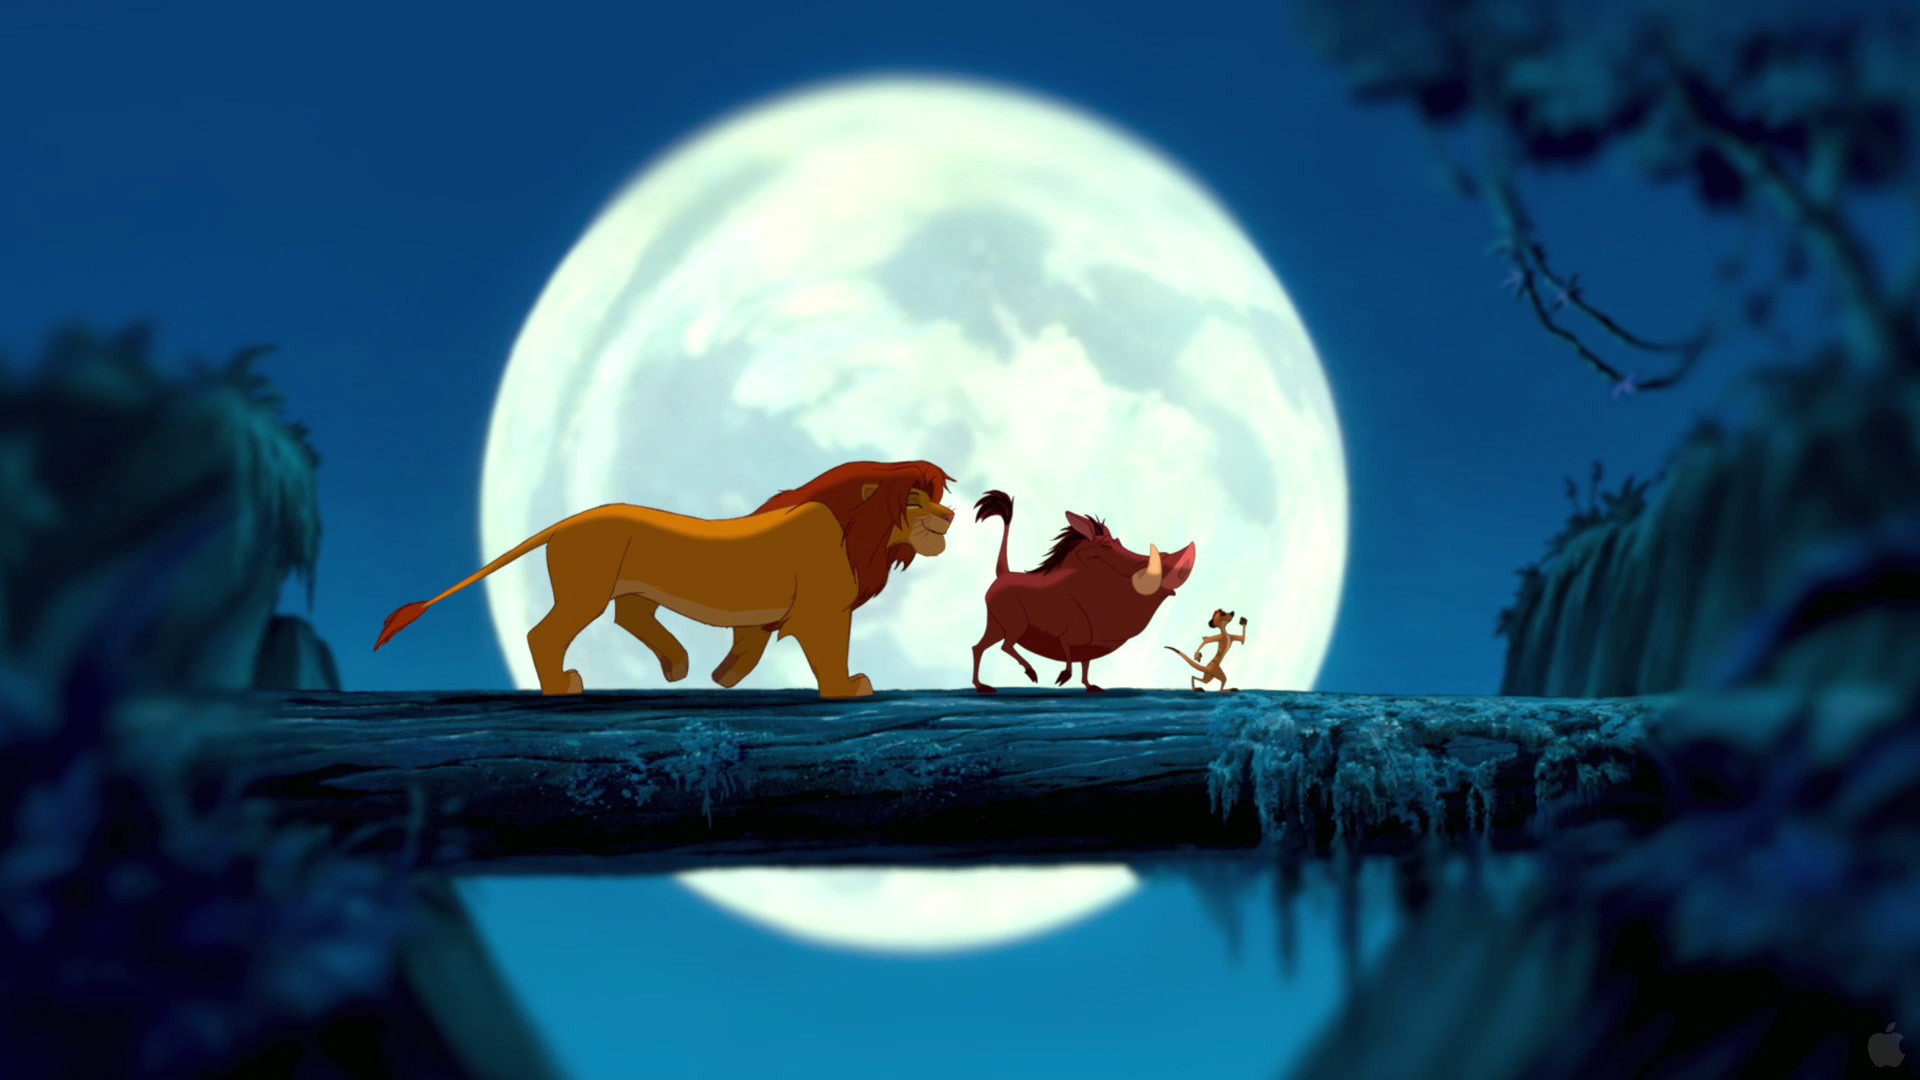 movie, the lion king (1994), the lion king